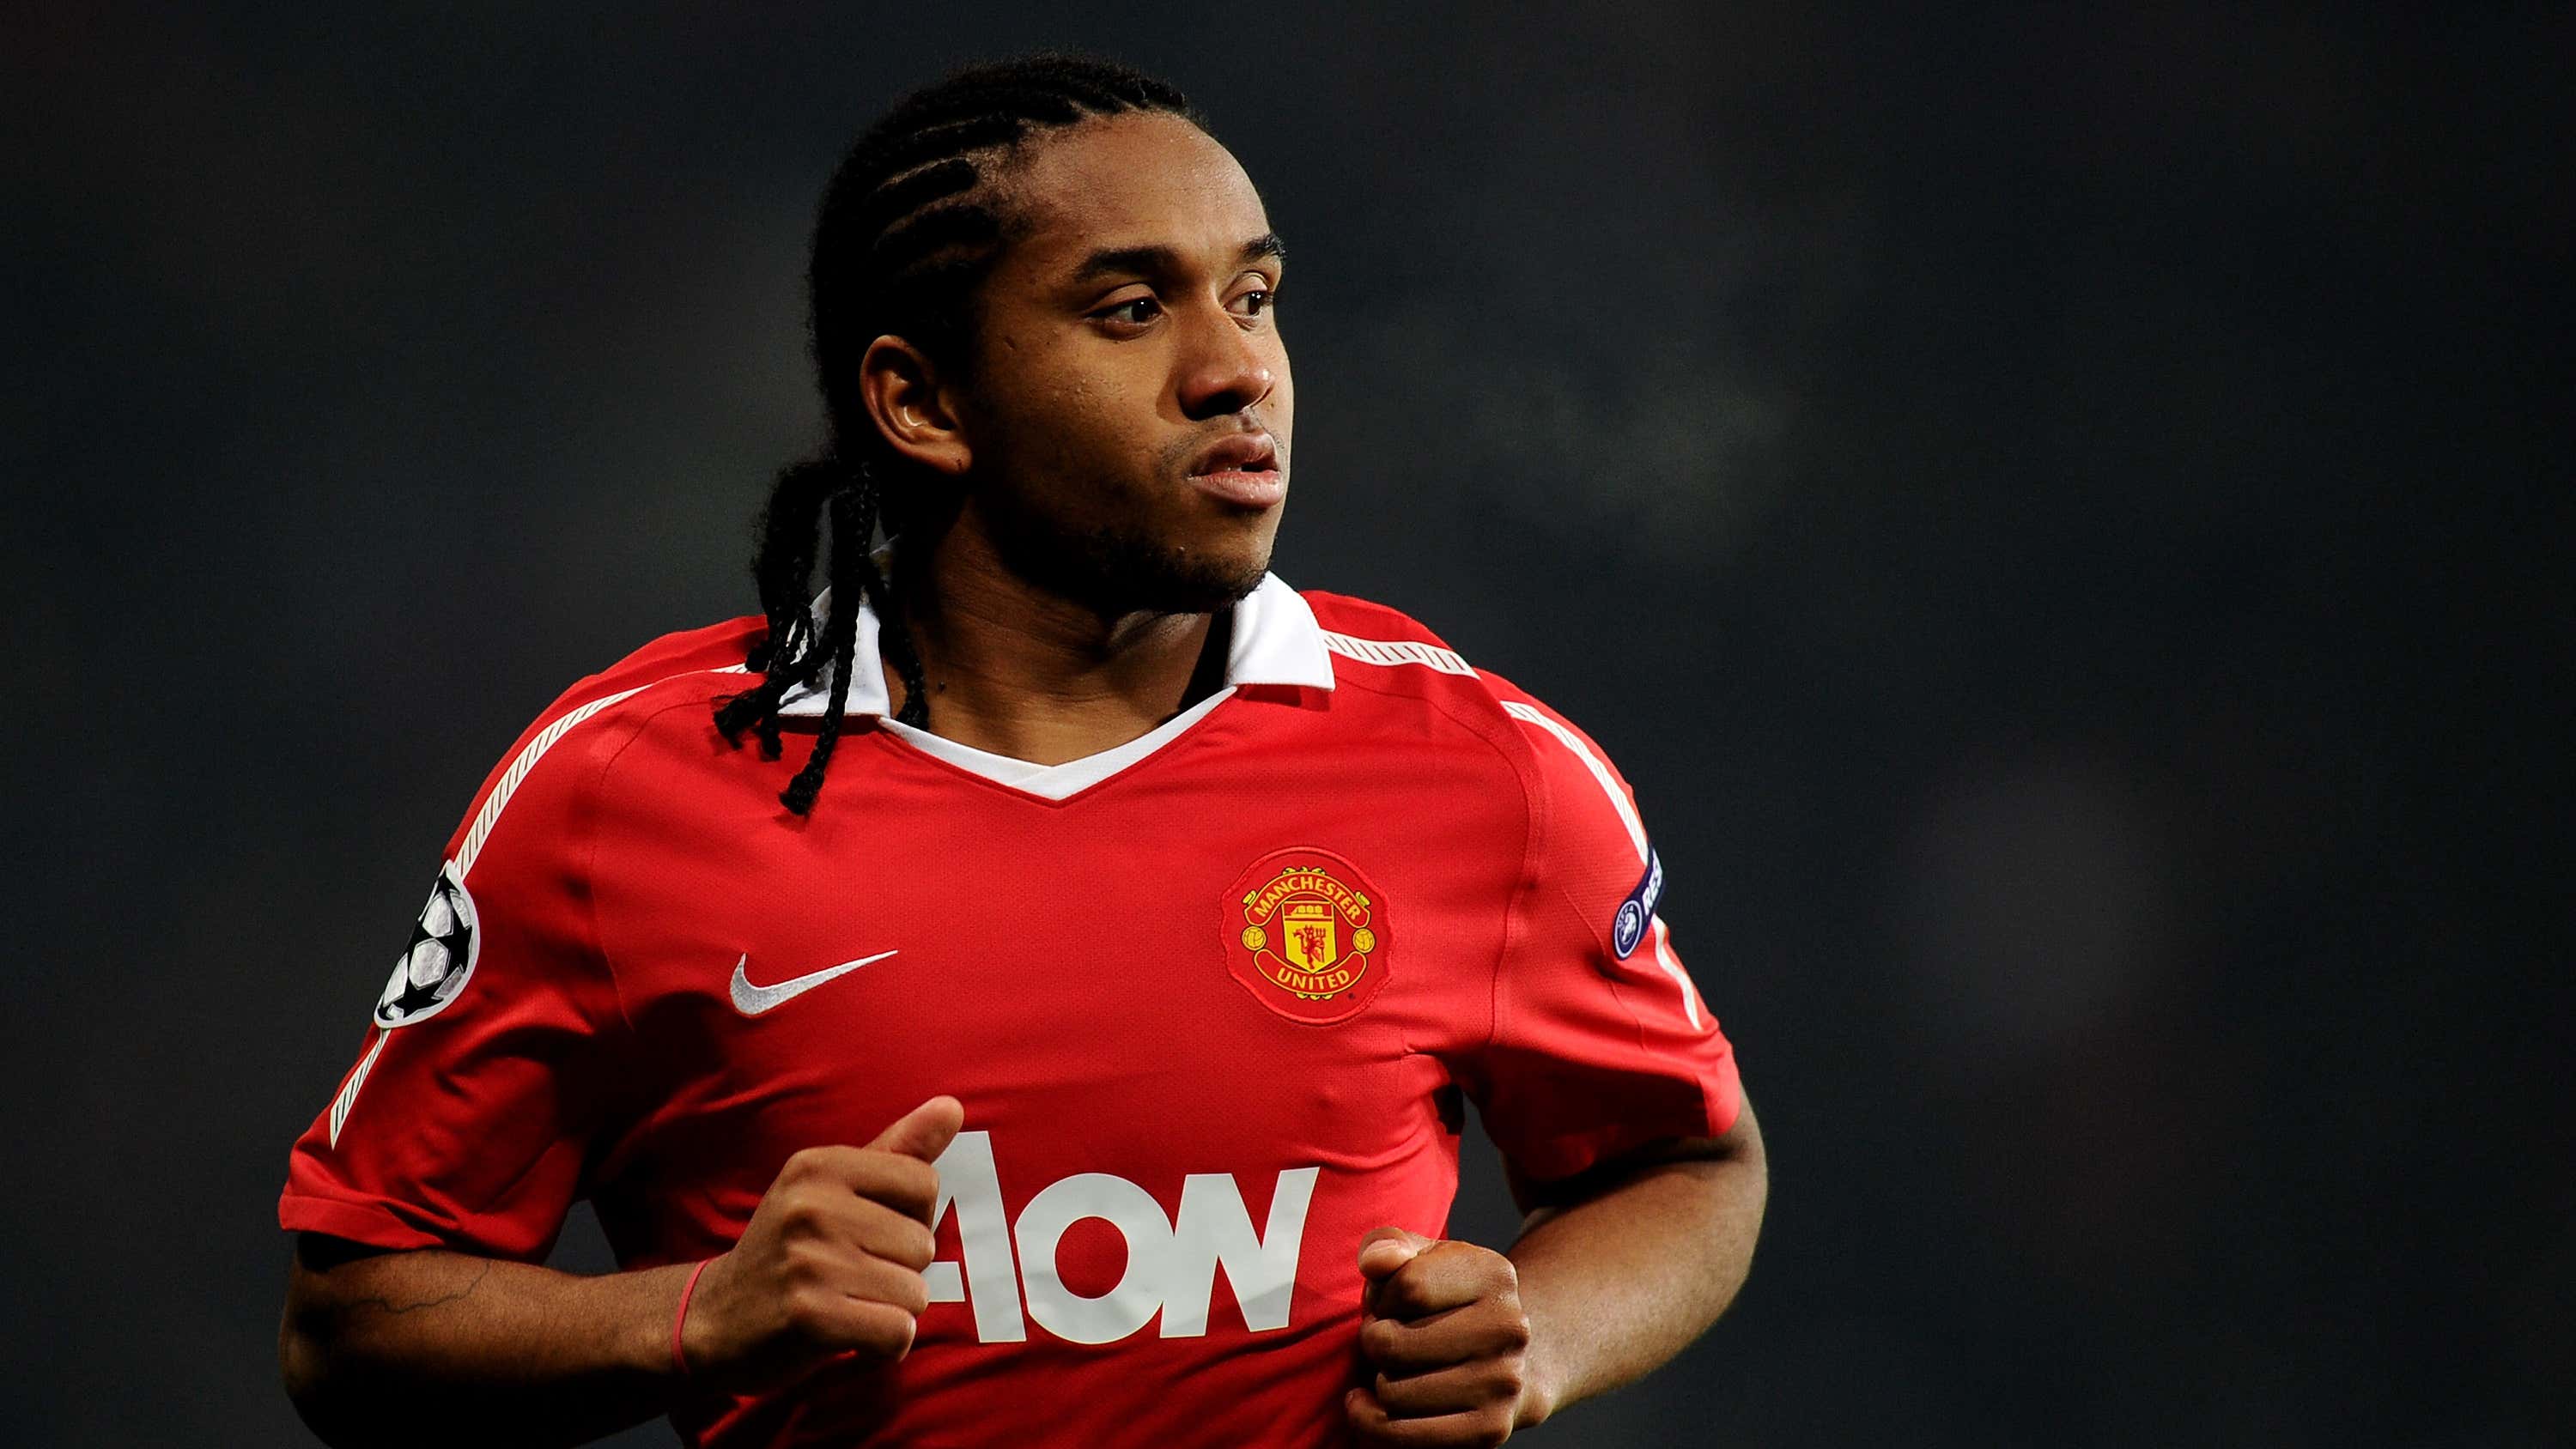 Anderson Manchester United